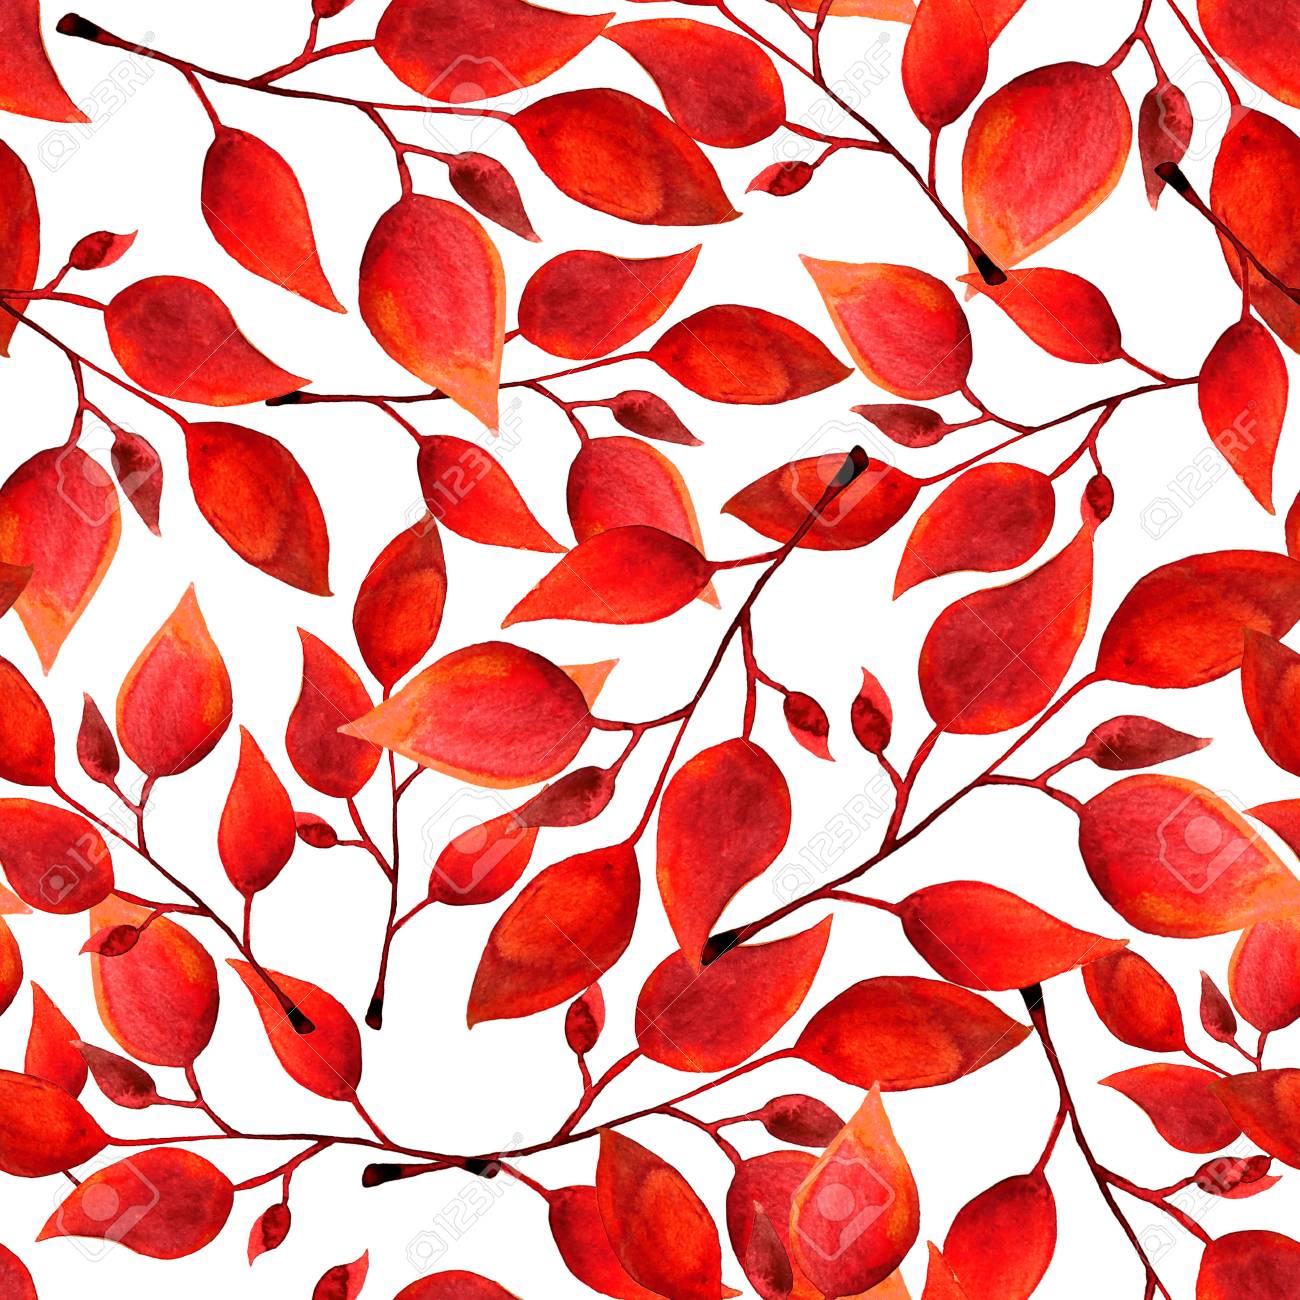 Seamless Watercolor Pattern With Red Leafs On White Background